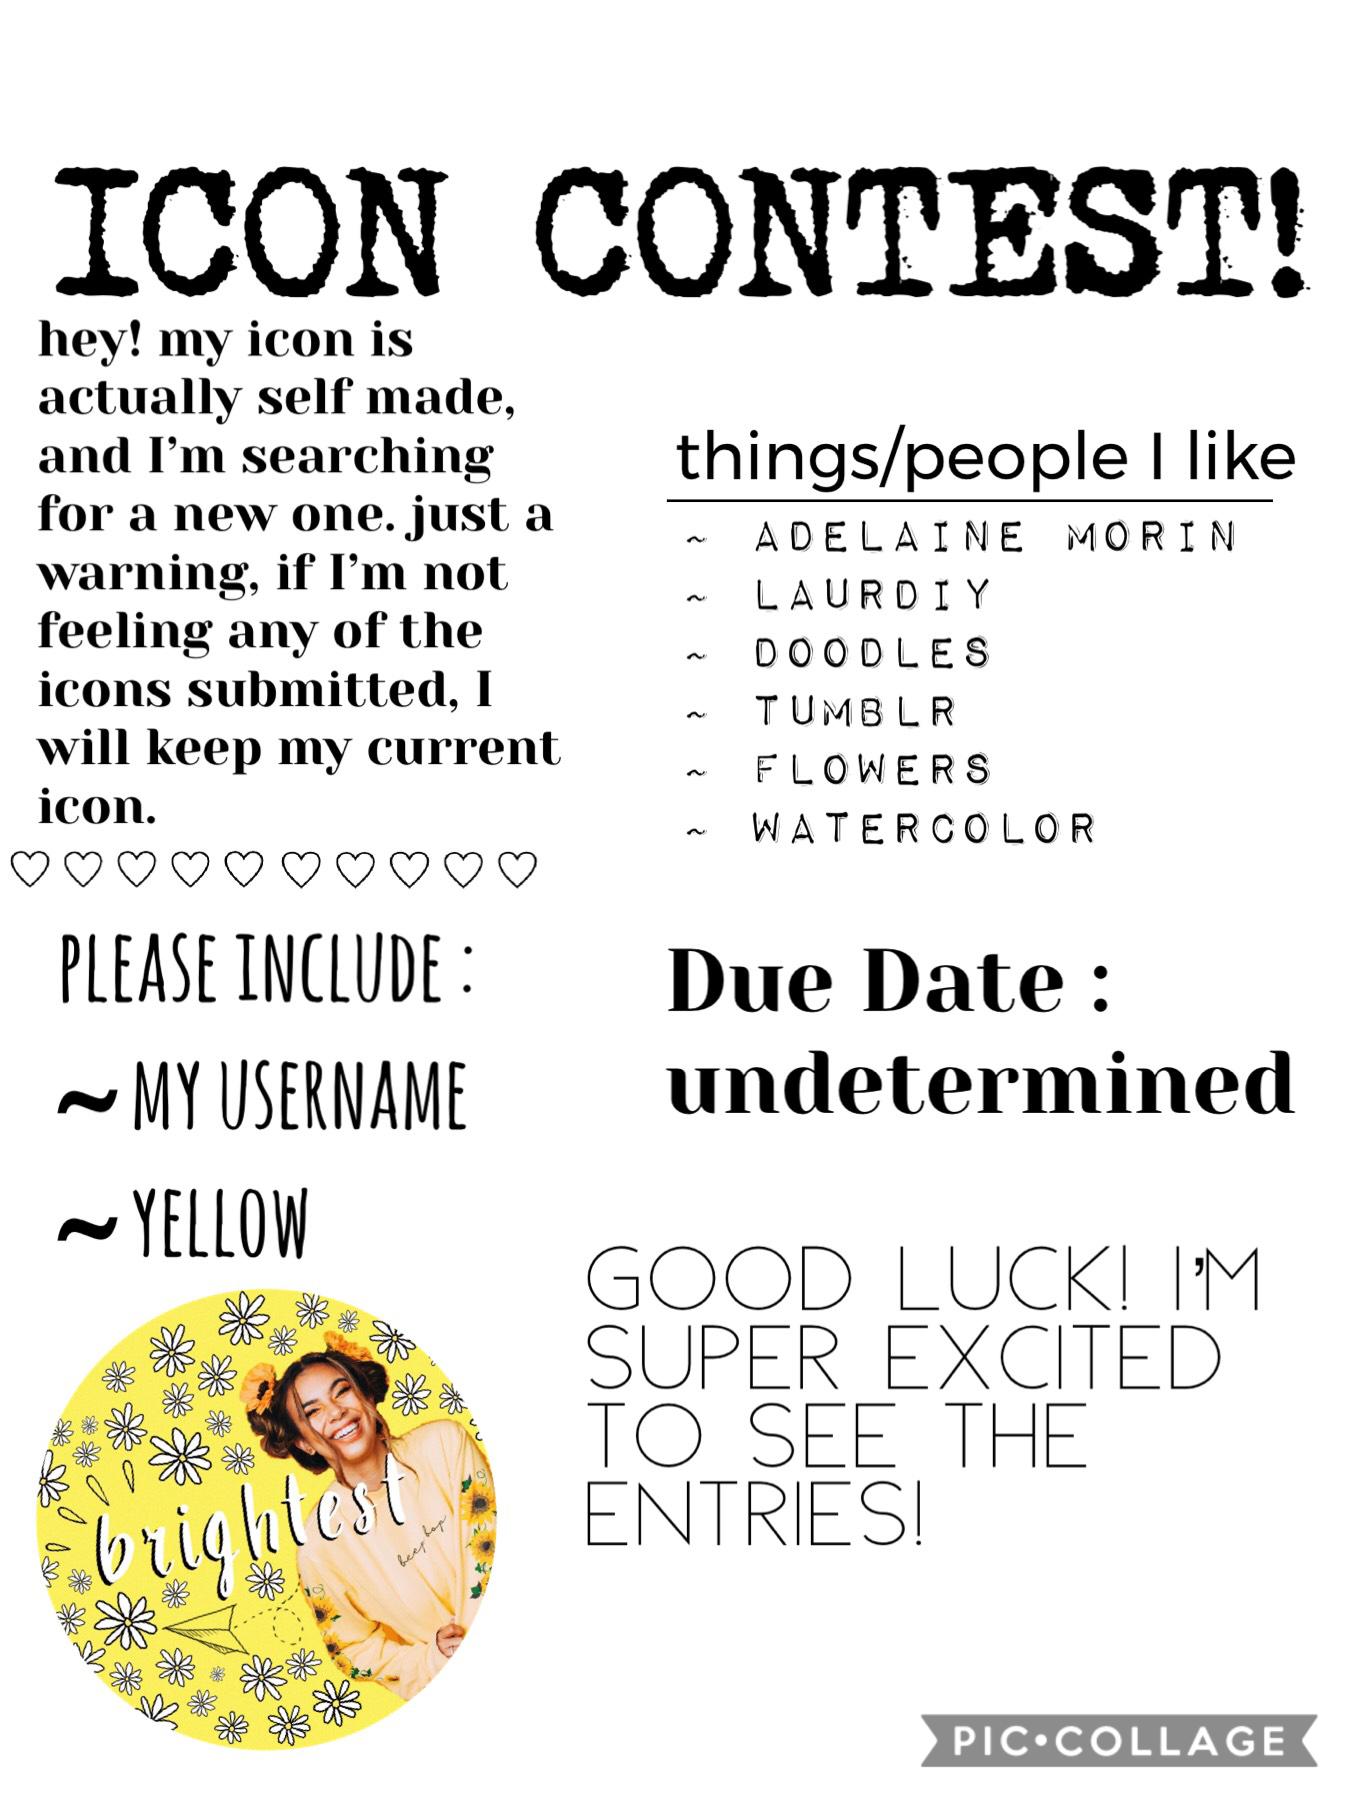 Please tap the turtle >>🐢
I had to end my Lauren Daigle series early cause I wanted to post this!
I hope you enter and I am so excited for the results!